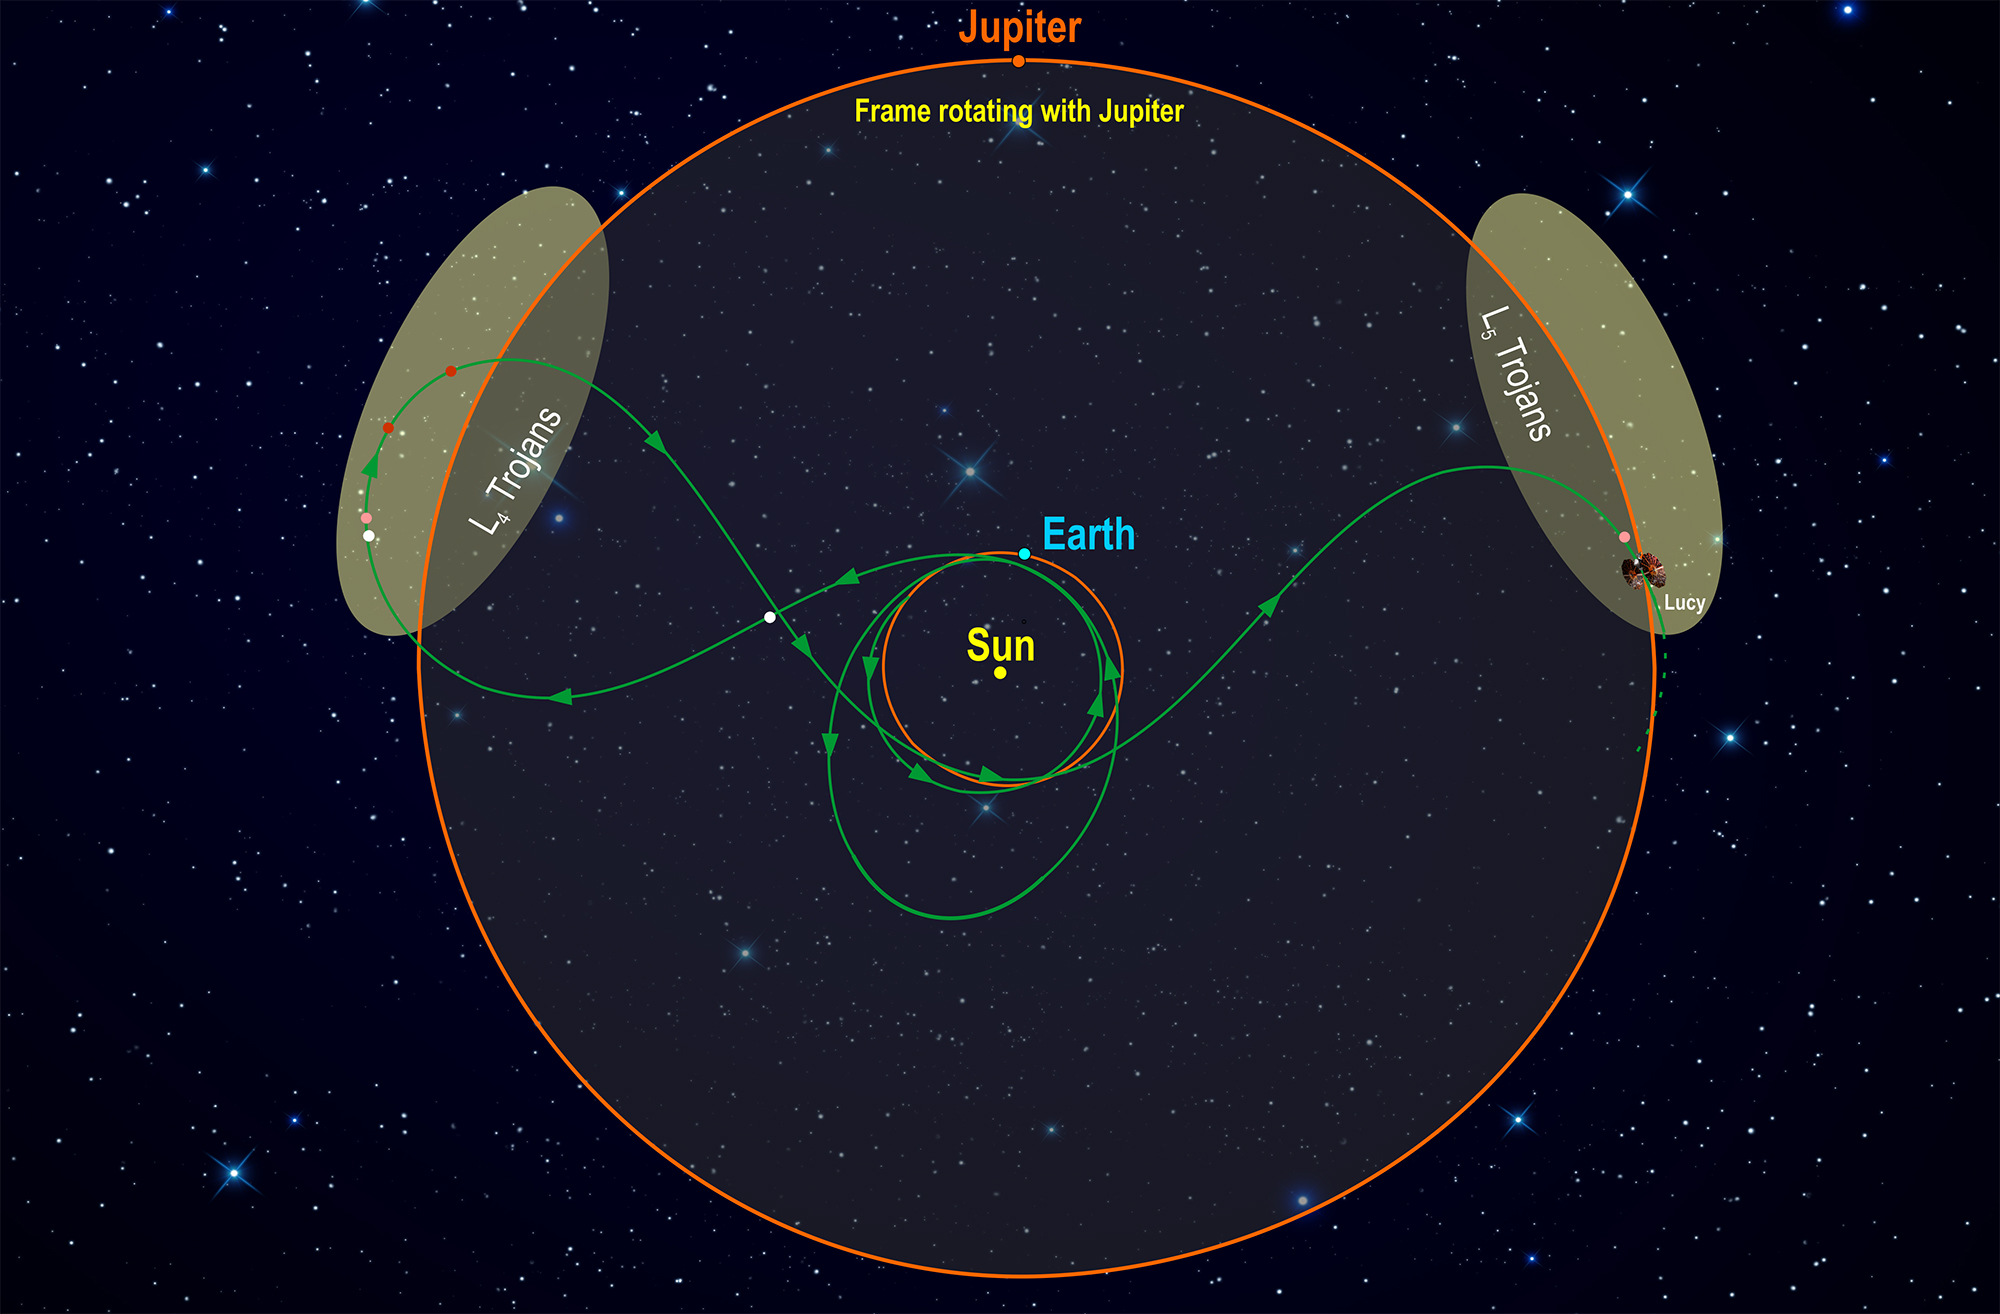 Mapped path of various items in our universe in relation to the sun. Jupiter is at the middle top, L. Trojans:  left and right ovals, Sun: in the middle, Earth: up and right of sun,  Green arrows: The Lucy Spacecraft